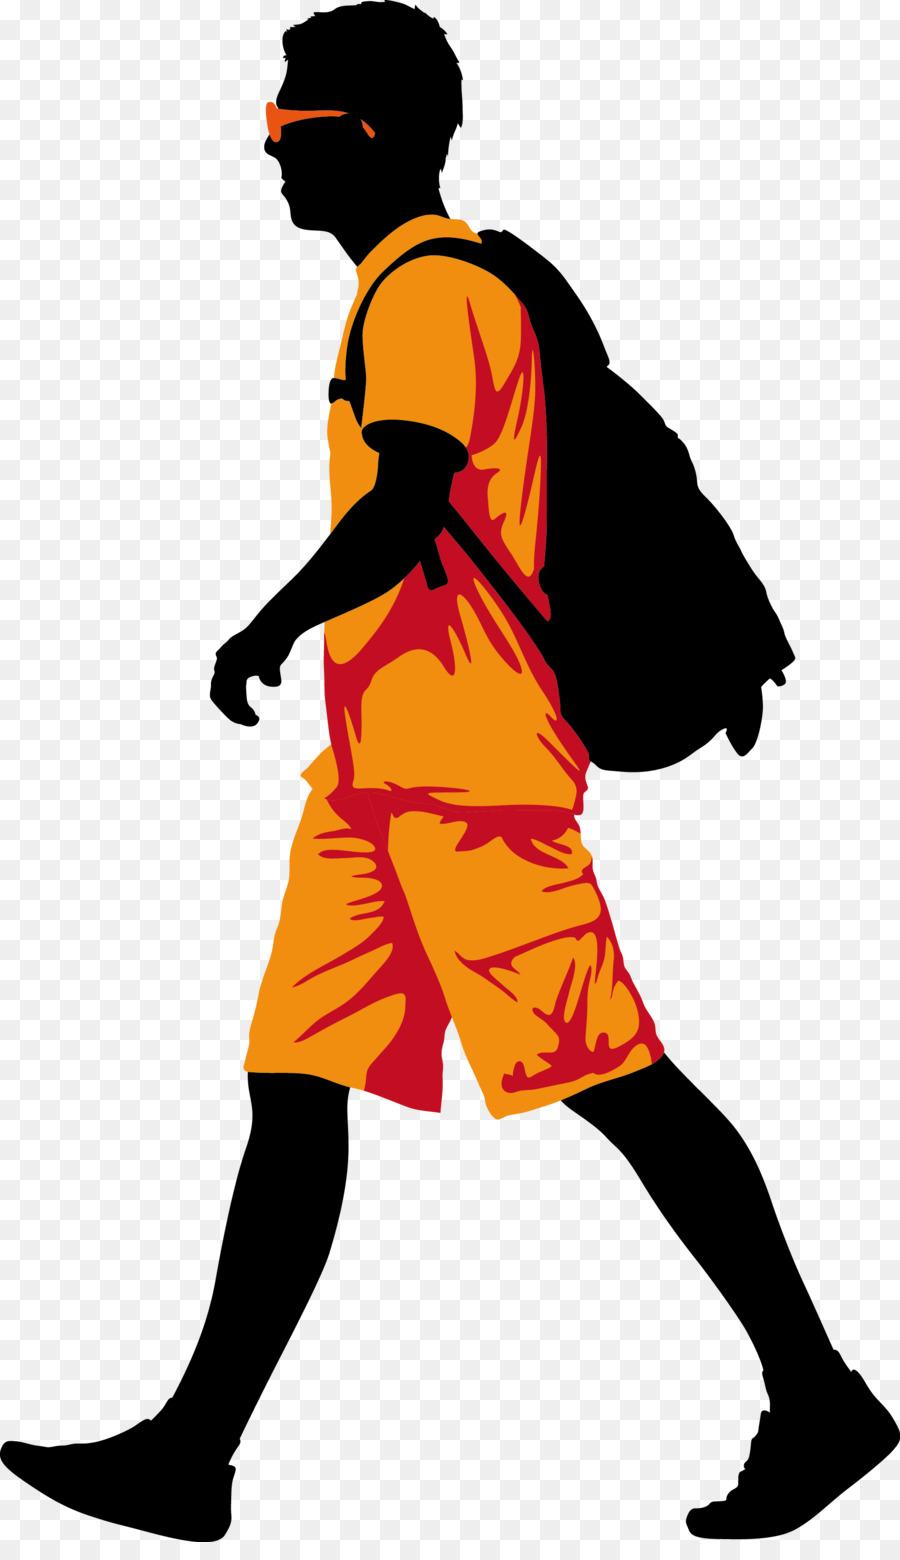 Man Clip art - A man walking with a satchel on his back png download - 1911*3274 - Free Transparent Man png Download.